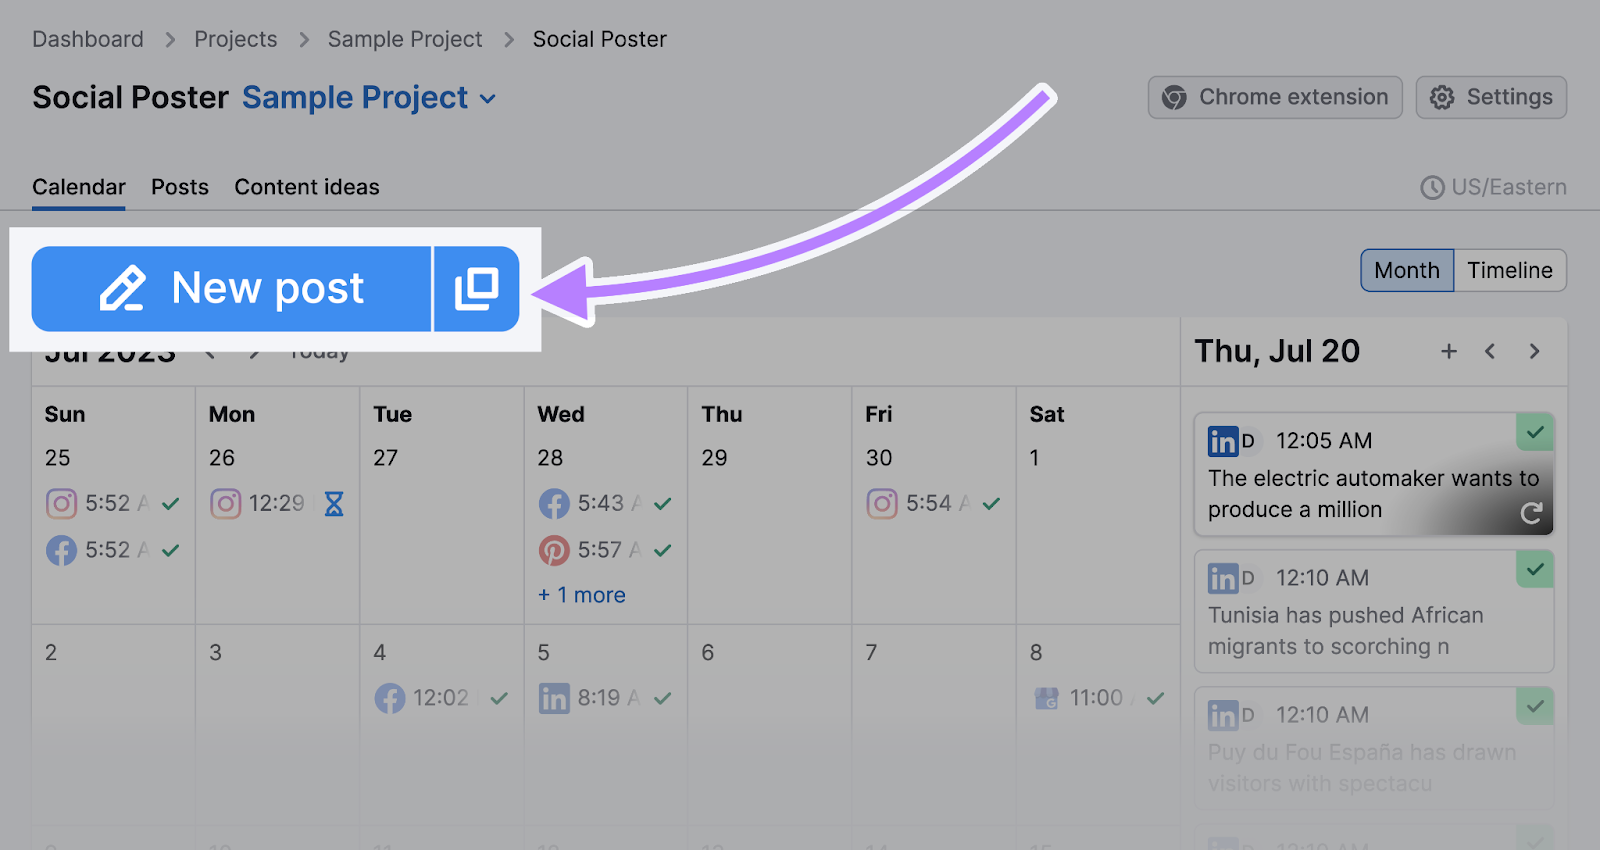 “New post” button highlighted in Semrush’s Social Poster